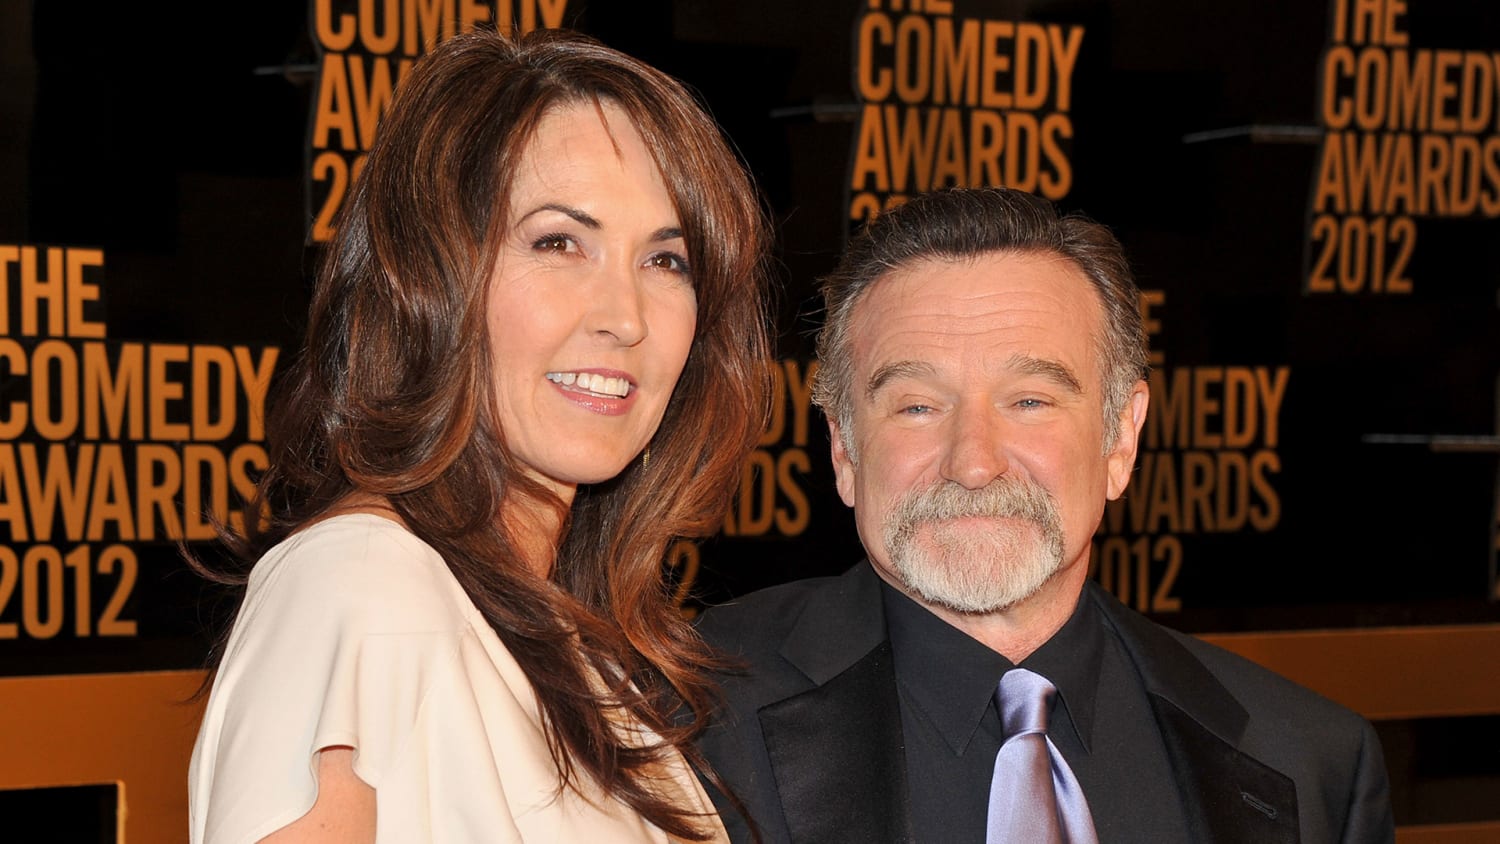 Robin Williams' widow gives moving speech on their anniversary